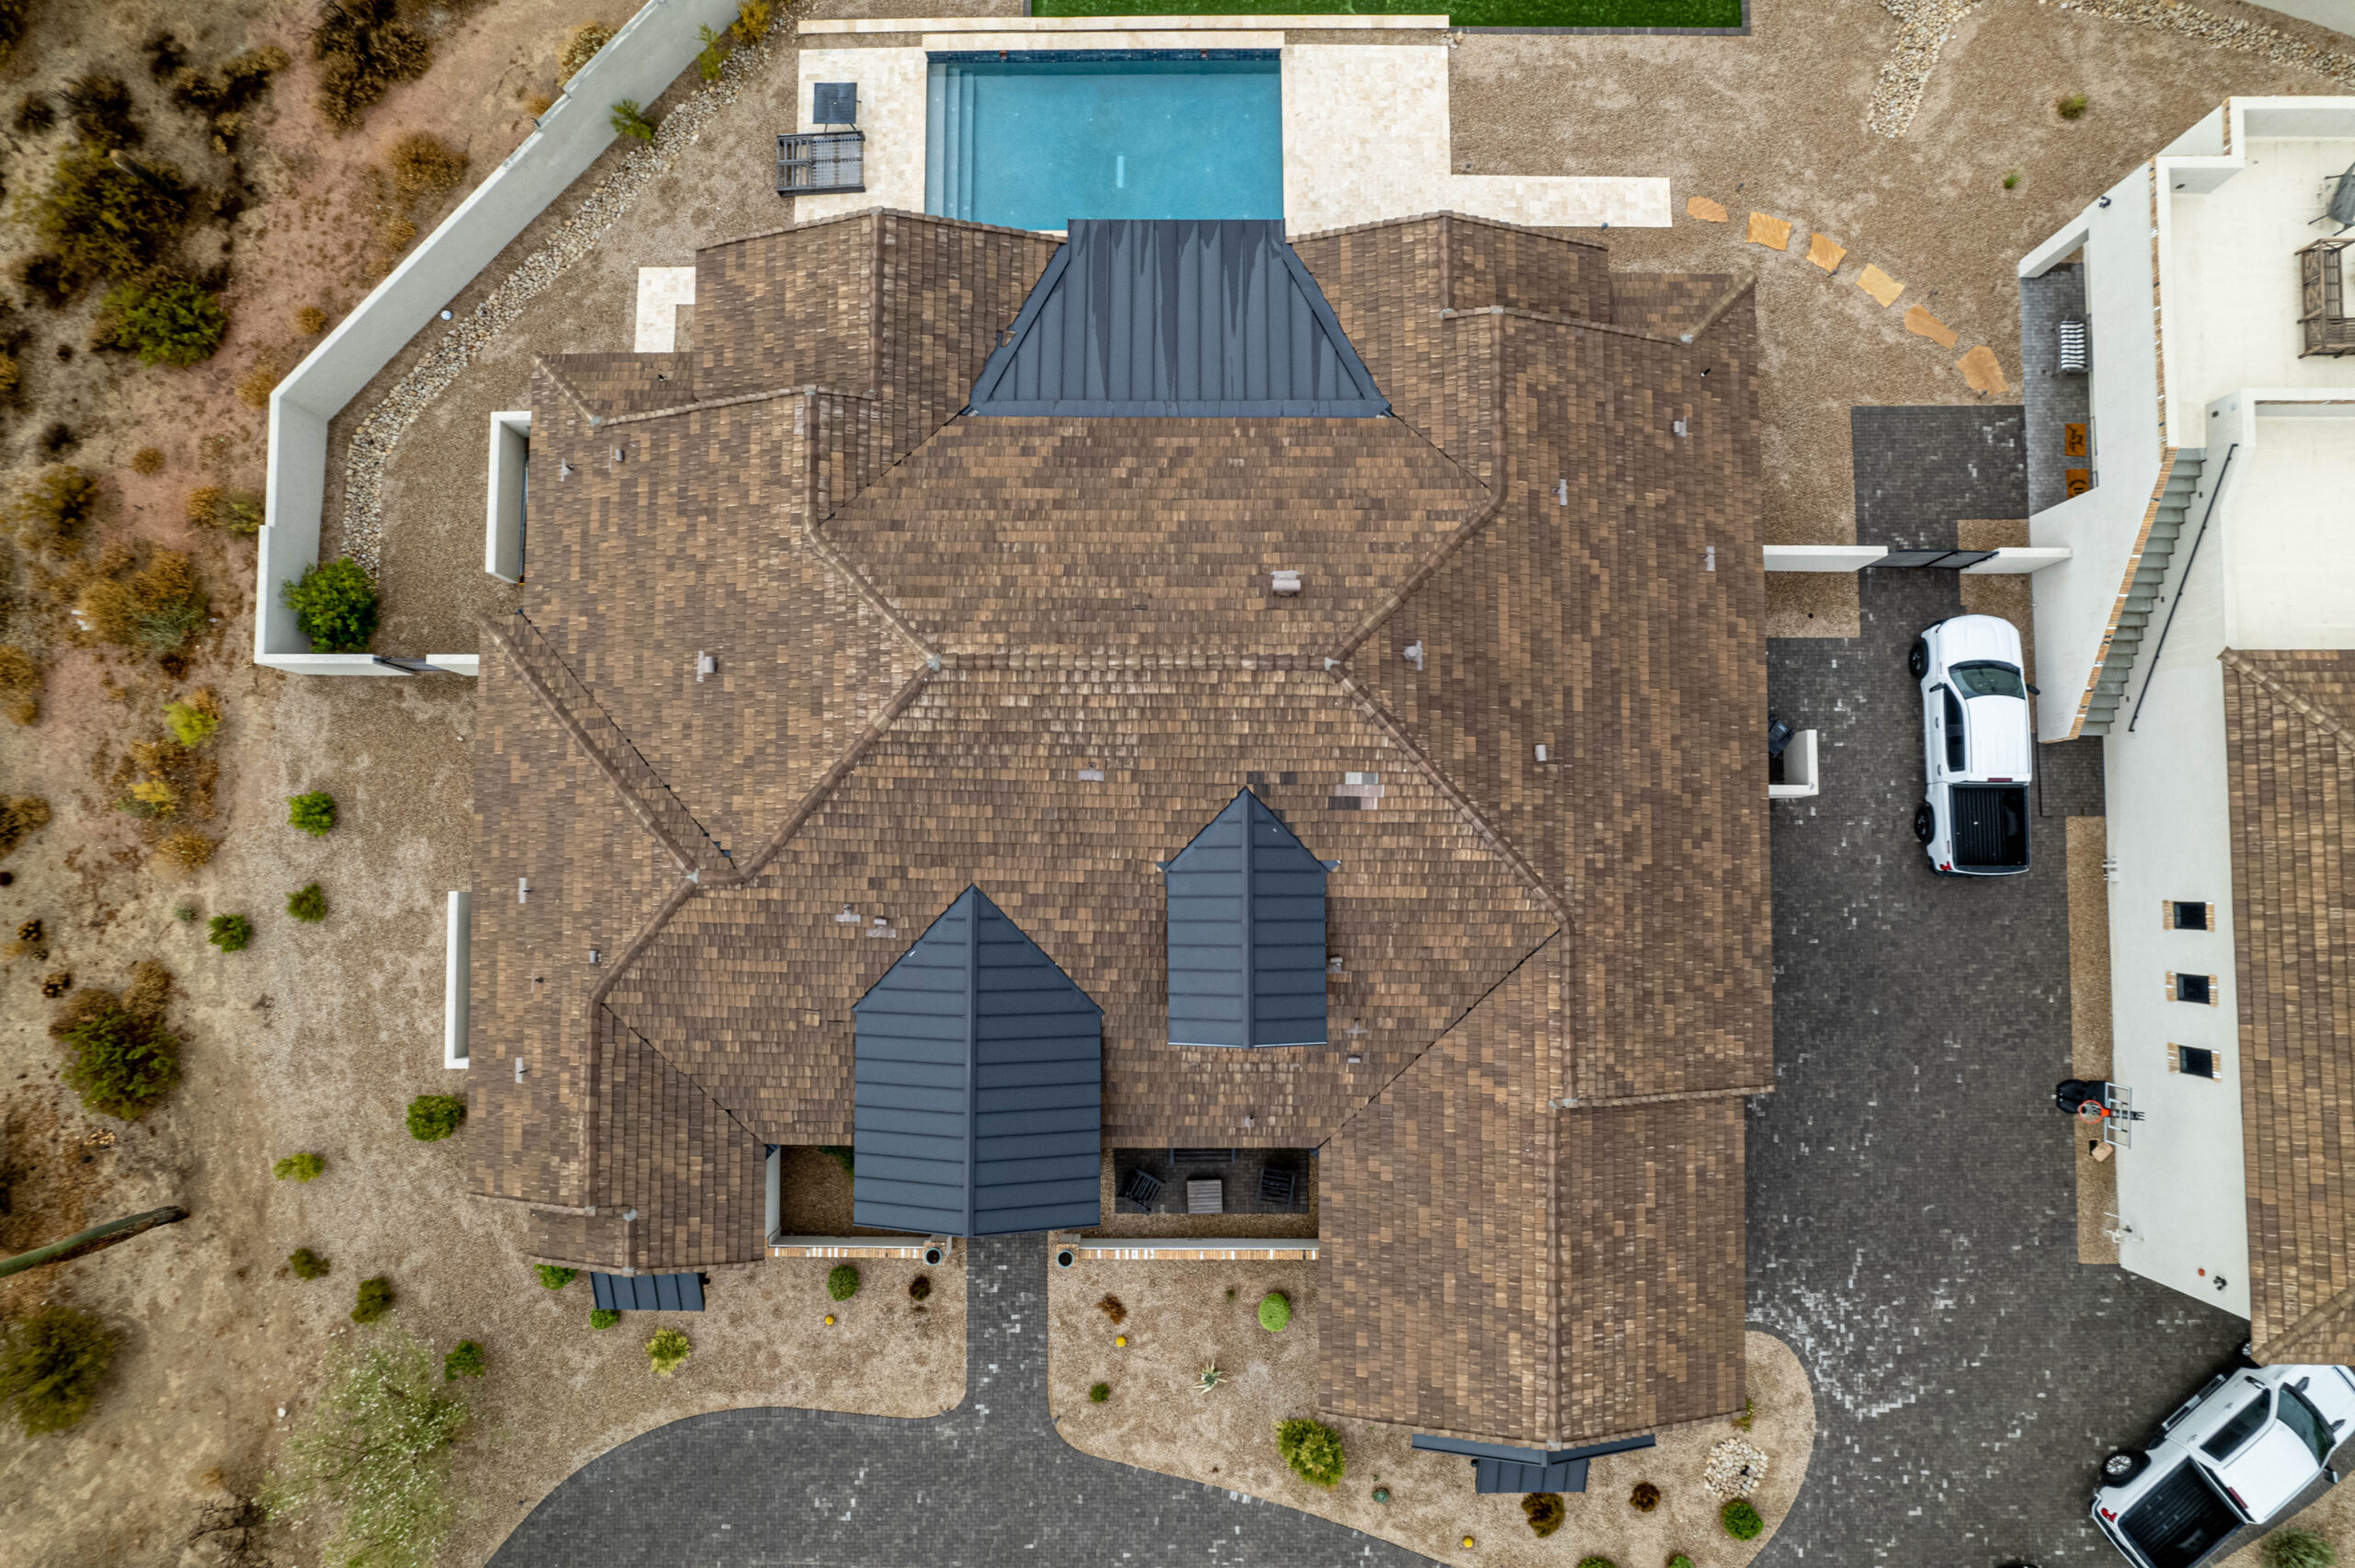 An aerial view of a house with a pool in Ironwood Village.